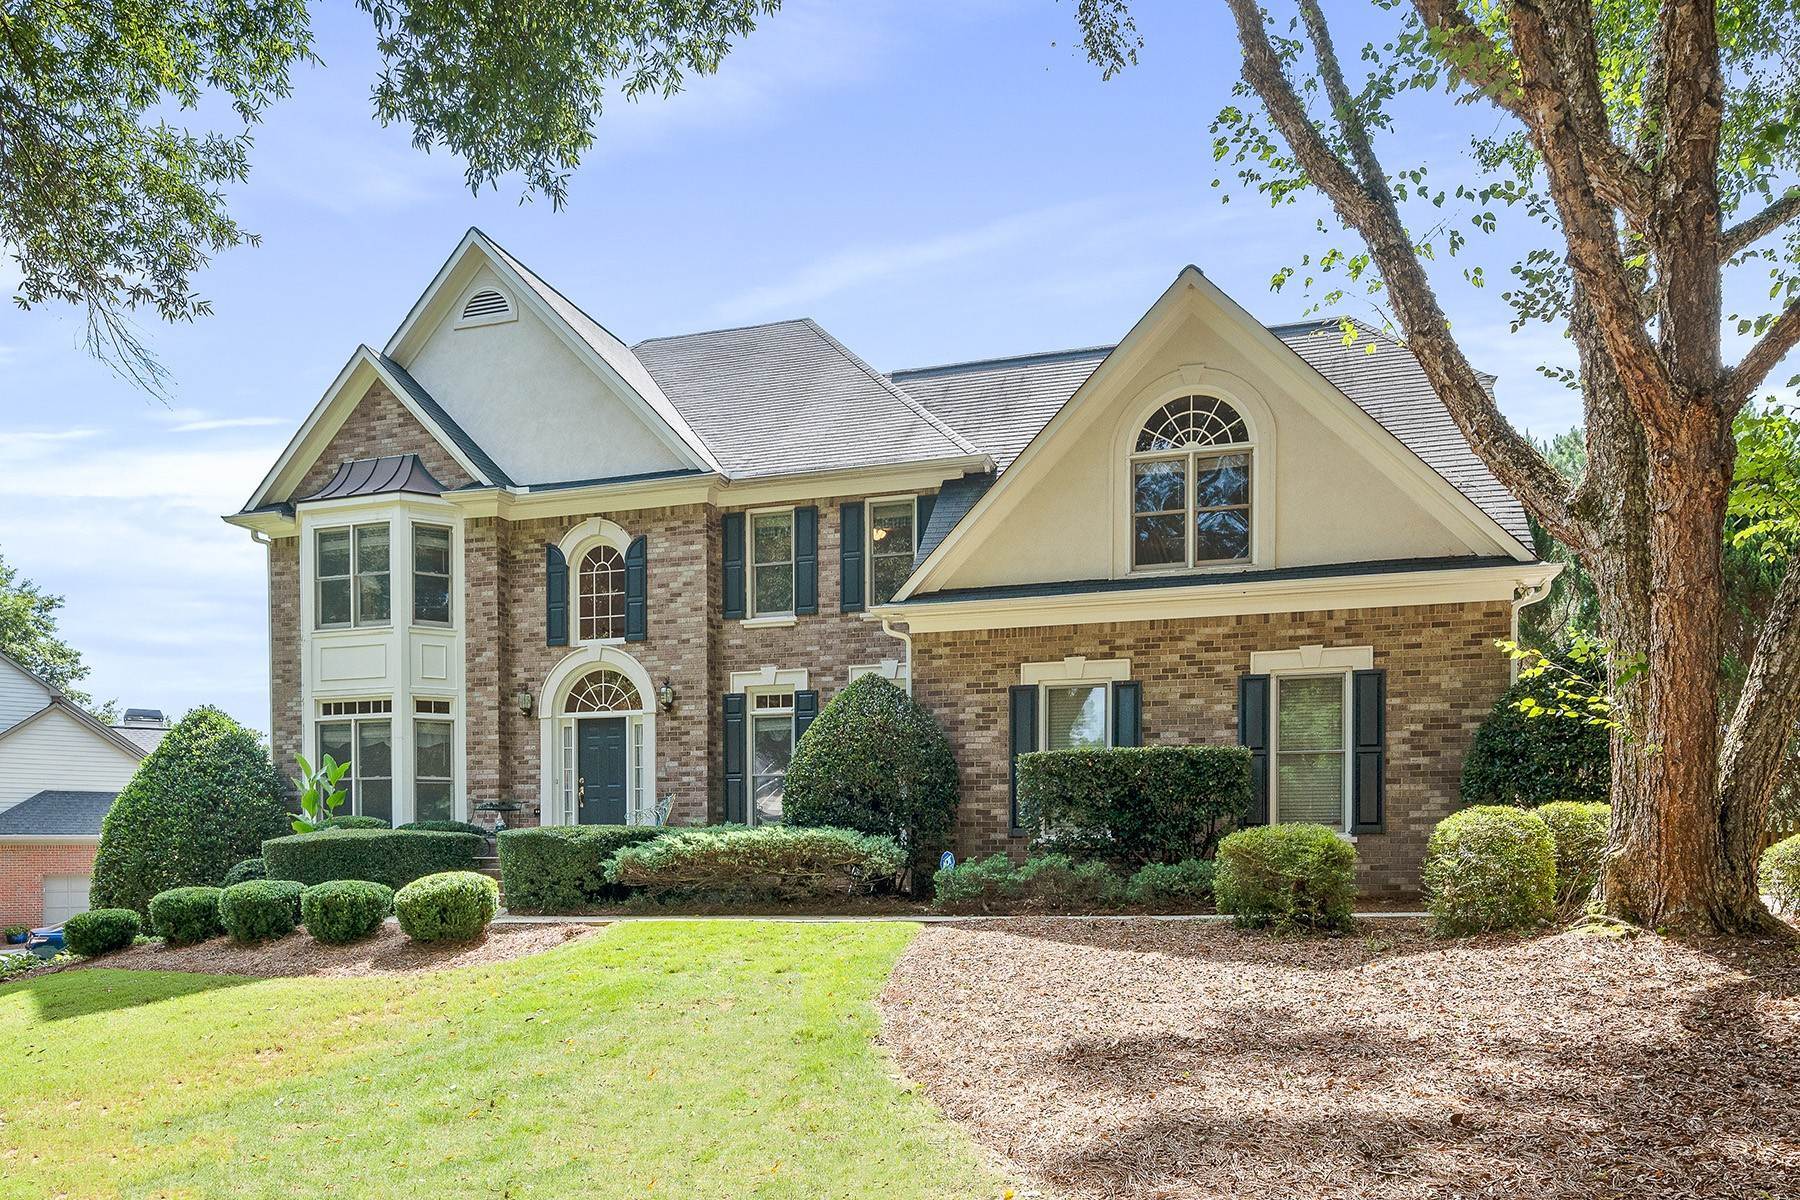 1. Single Family Homes for Sale at Impeccably Maintained Traditional in Highly Sought-After Grand Cascades 523 Settles Road Suwanee, Georgia 30024 United States